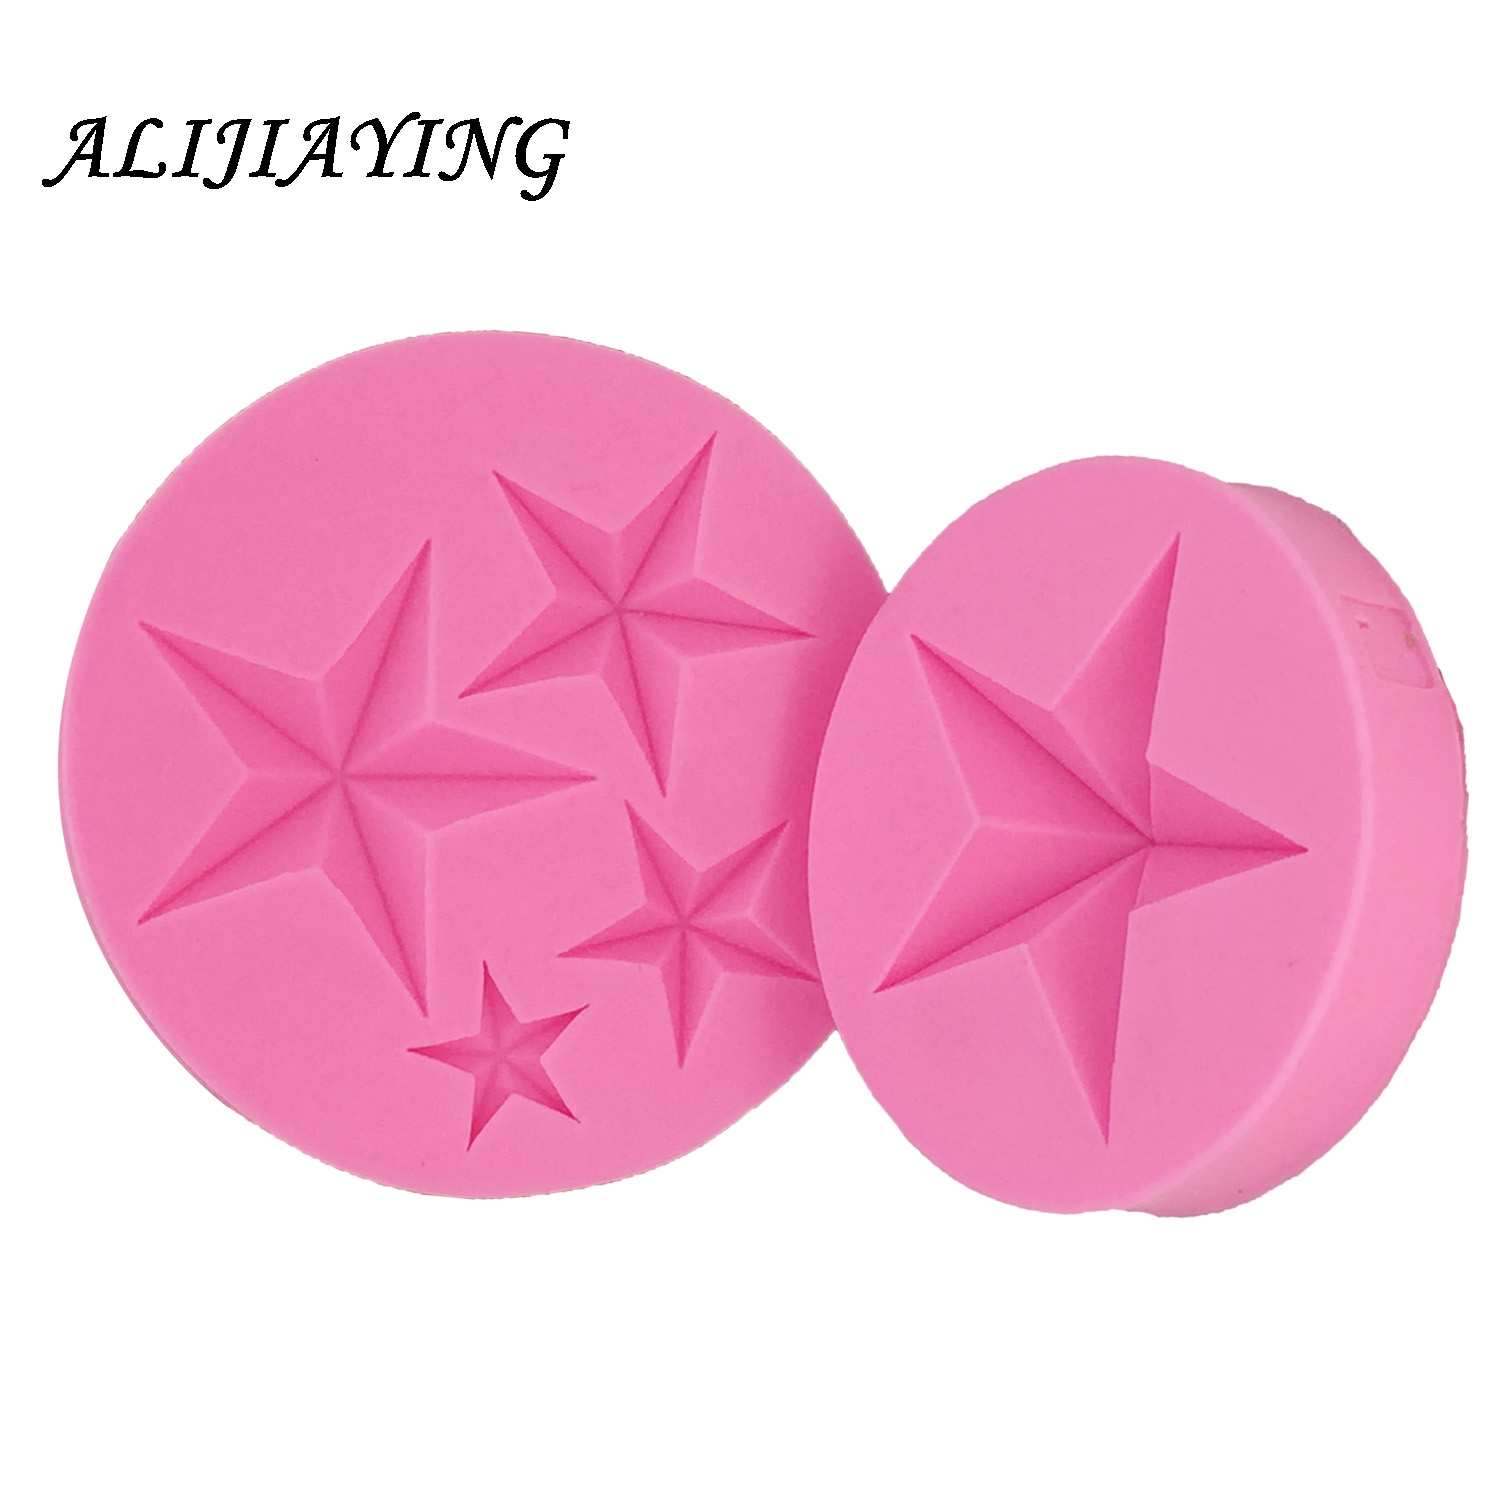 Star shape Silicone Fondant Molds Baby birthday Holiday party Cake Decorating Tools Chocolate Moulds articles D0962